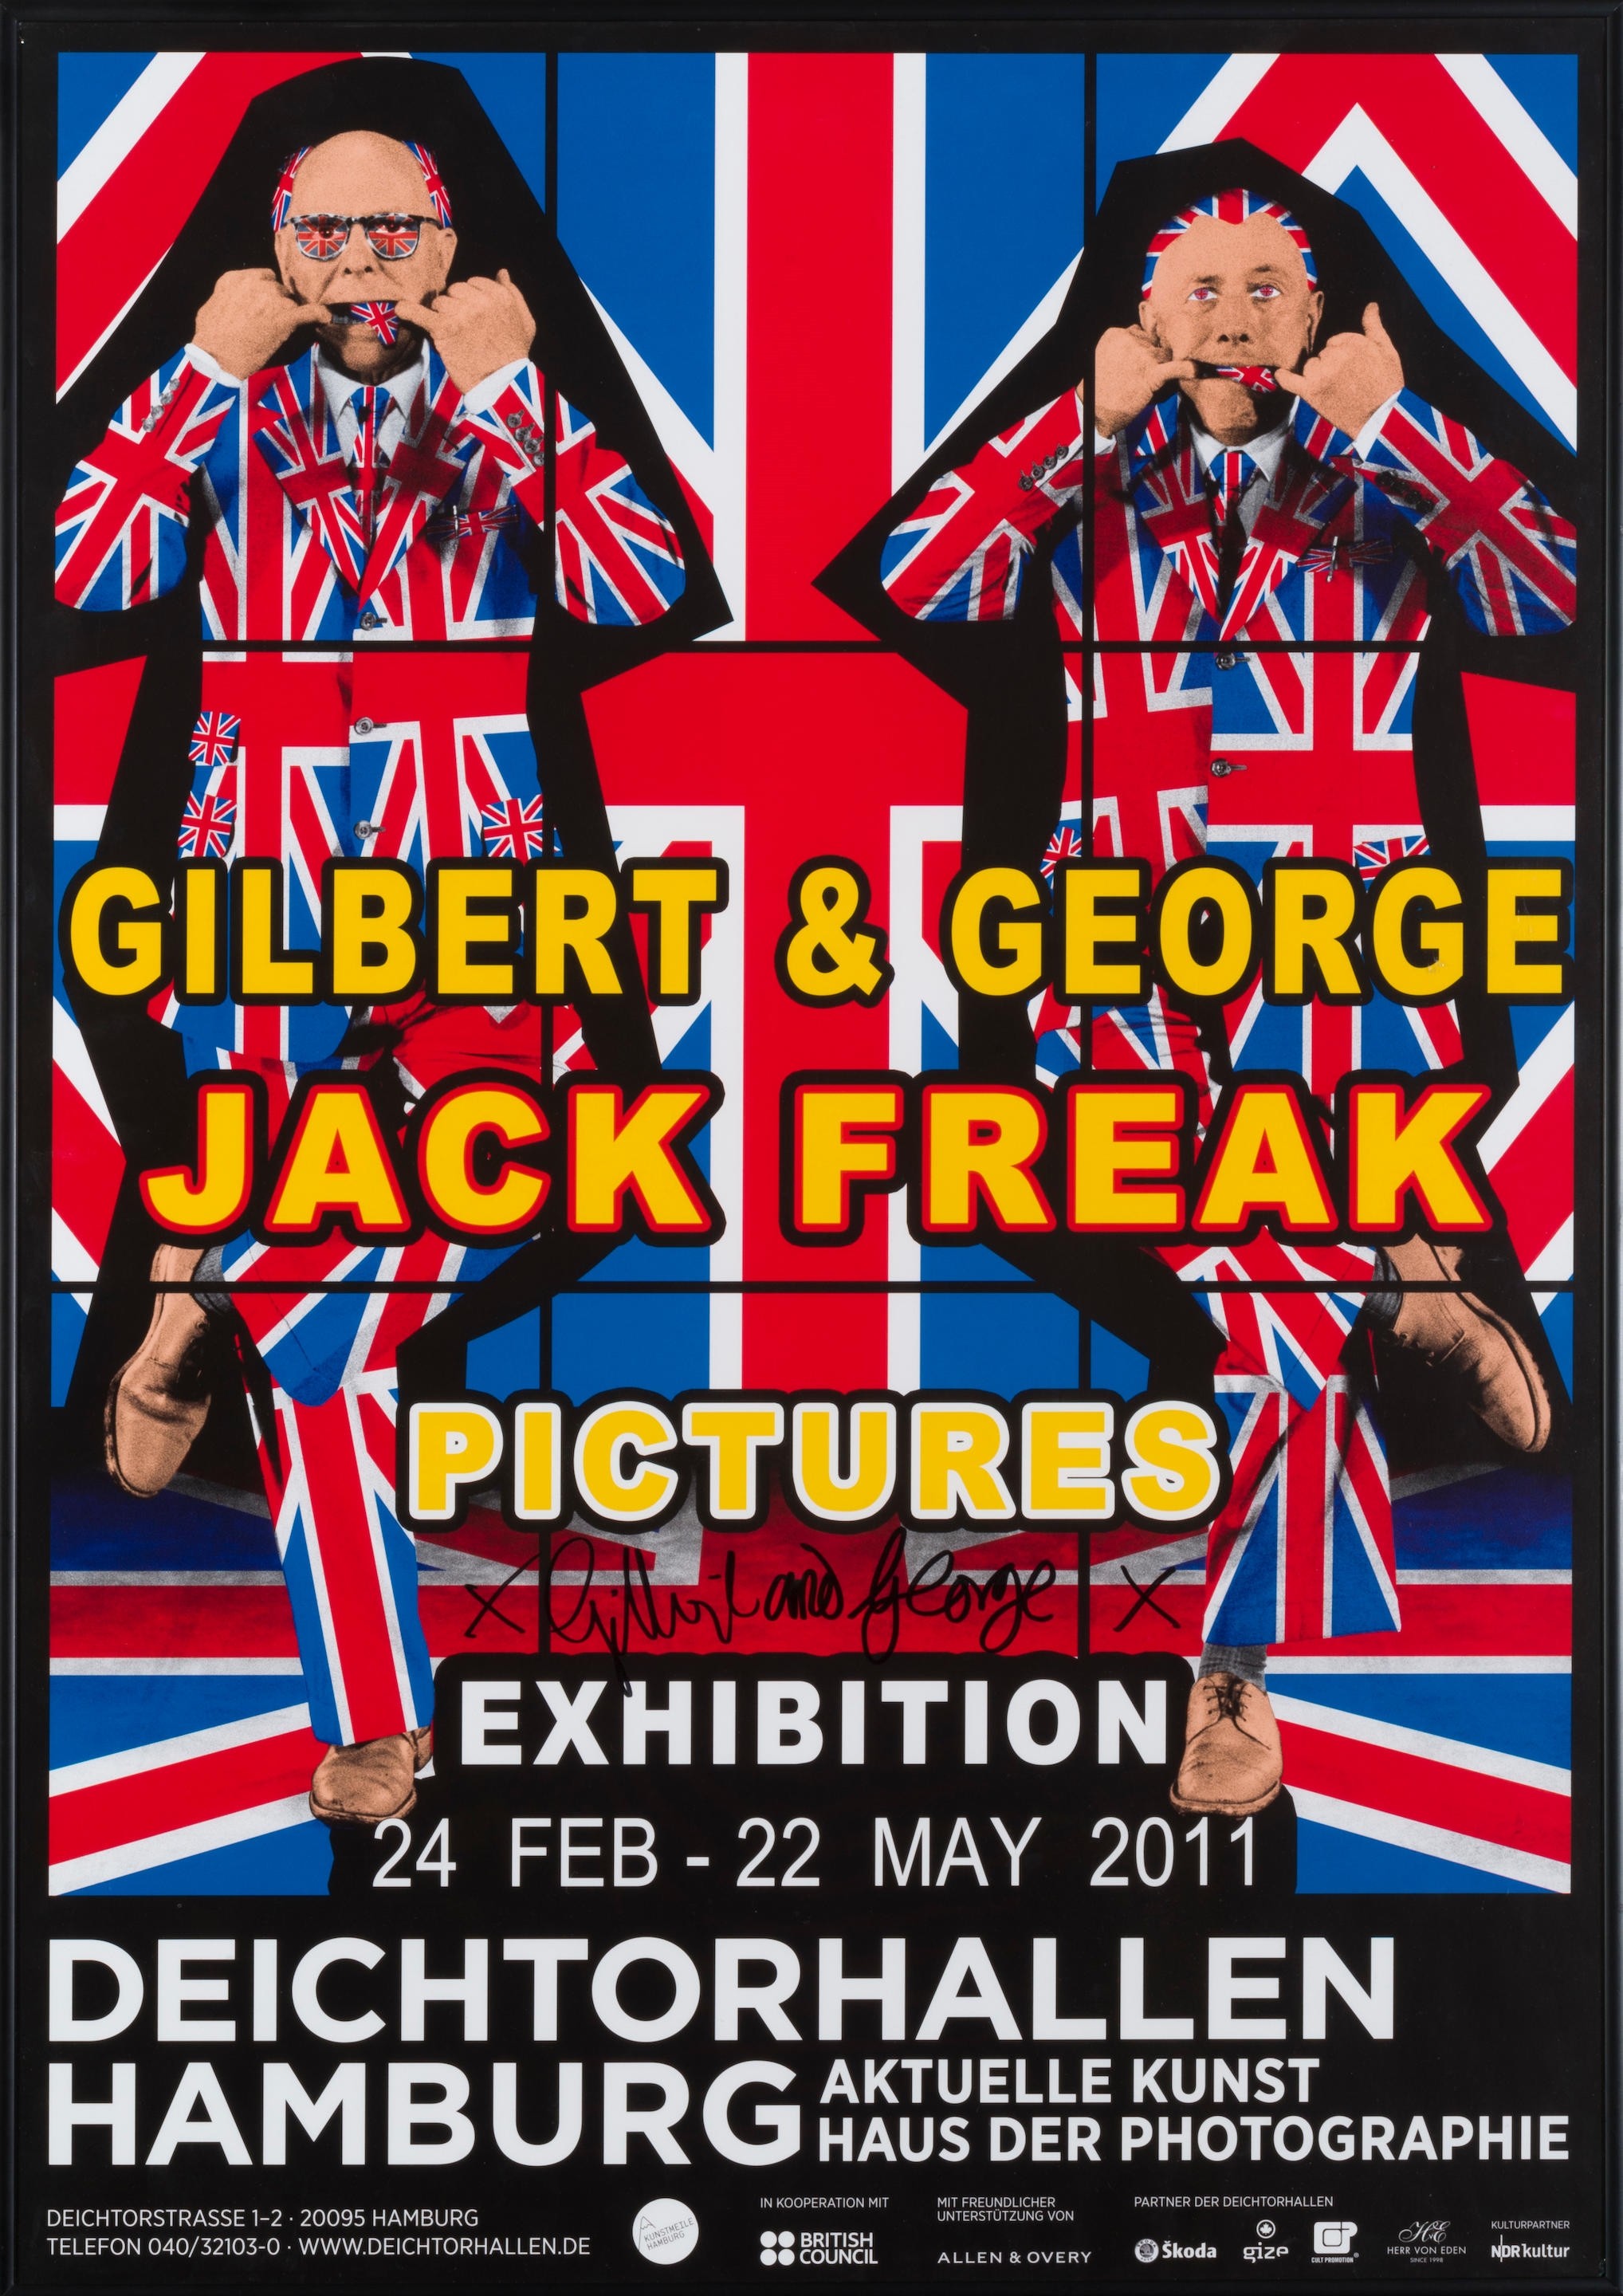 Artwork by Gilbert & George, Jack freak Pictures,	2011, Made of poster